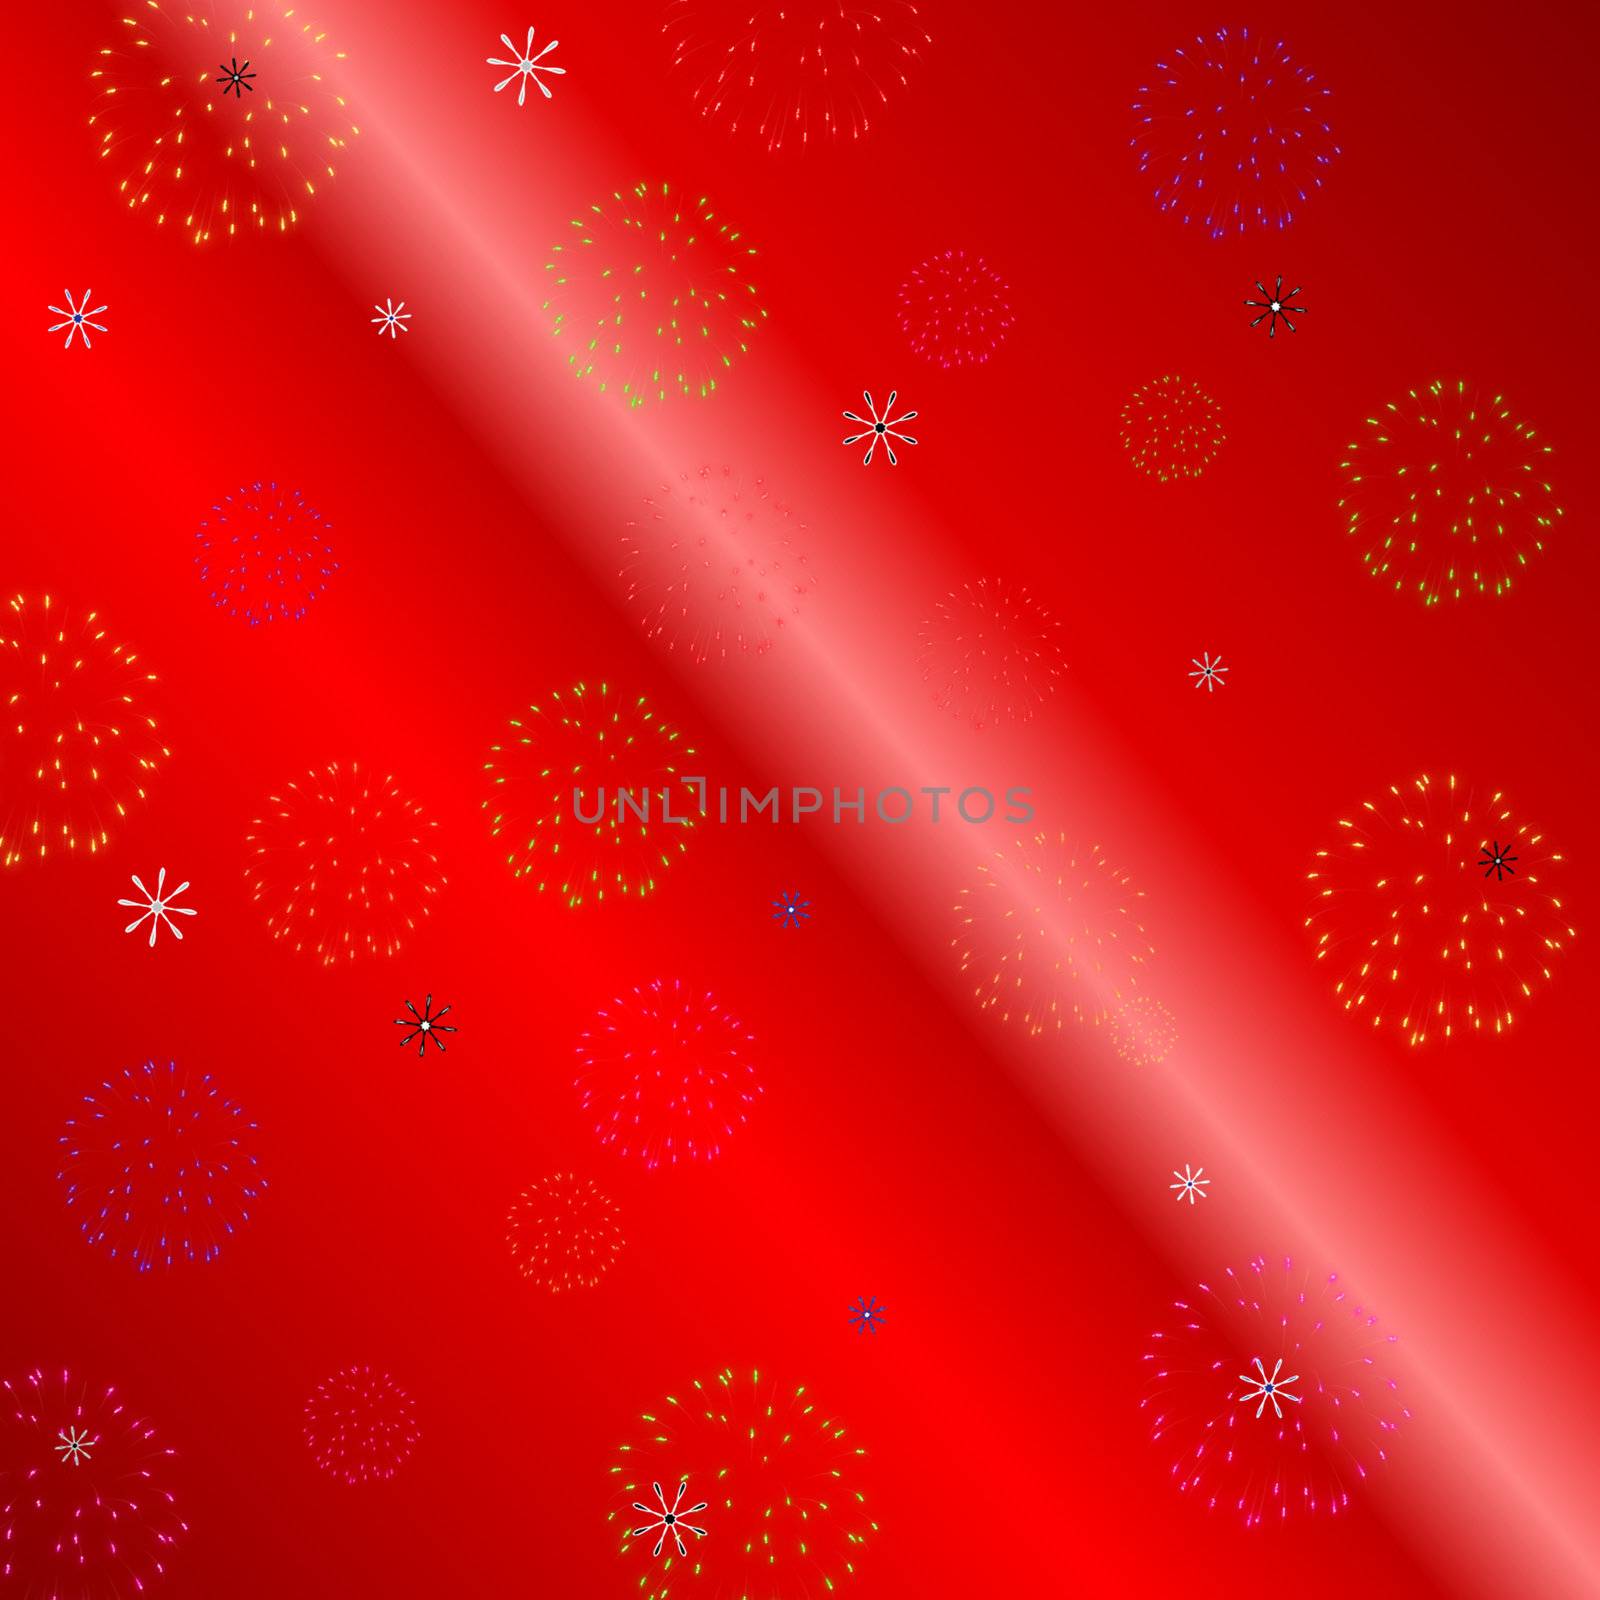 christmas red paper effect background with snowflakes and fireworks